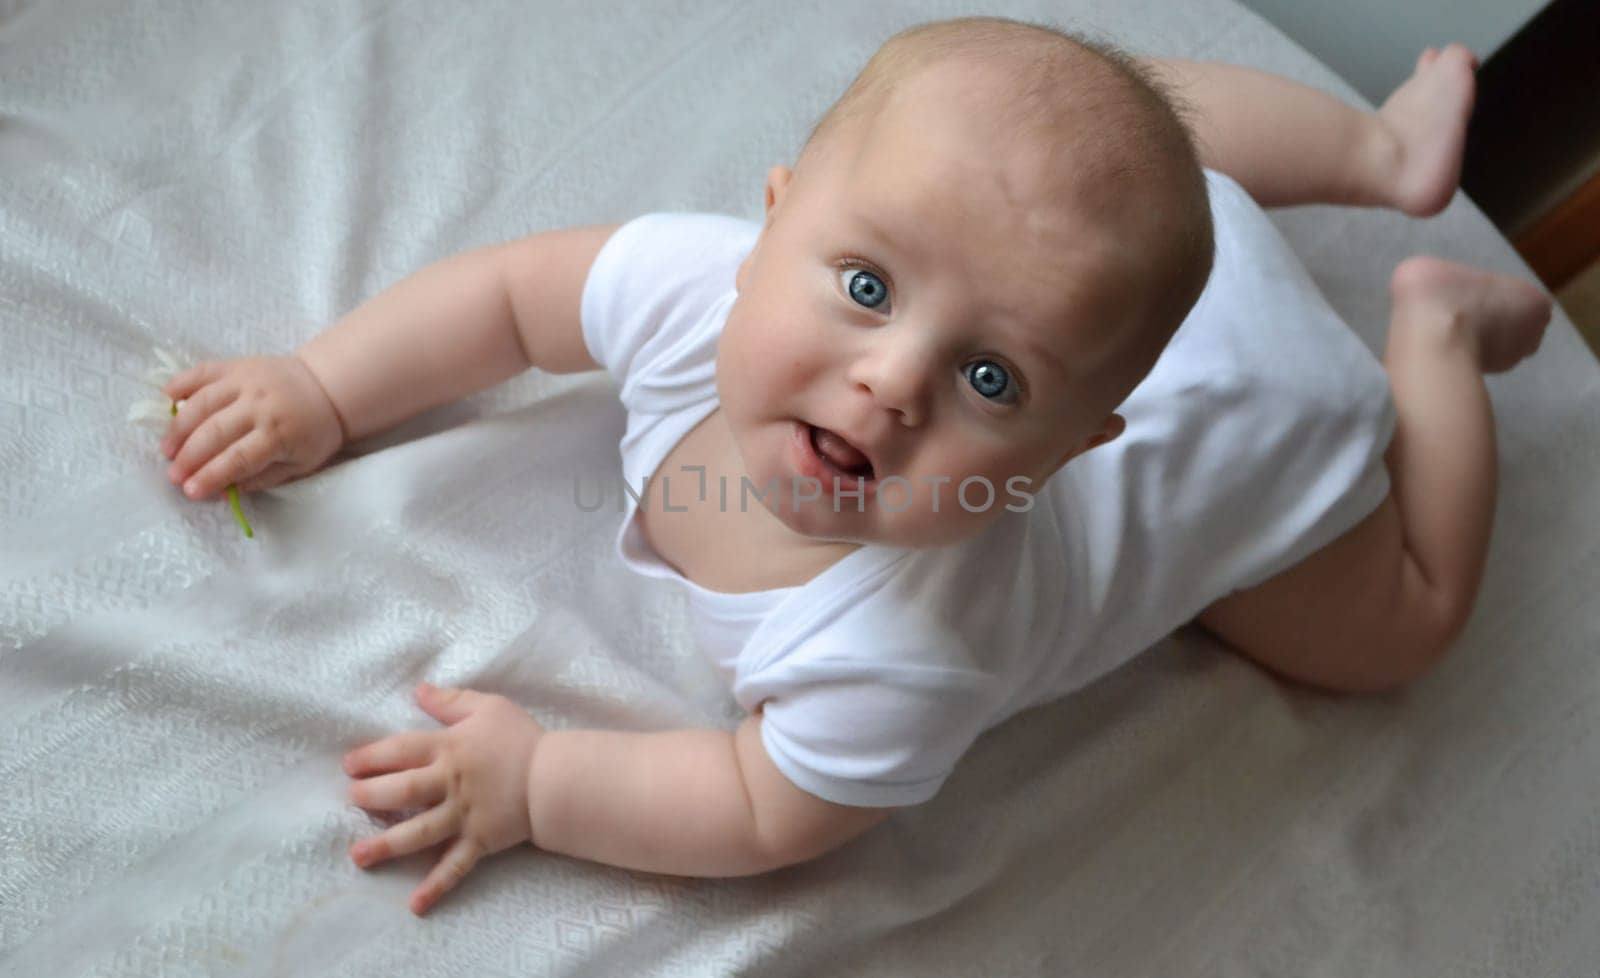 Children concept. A baby with blue eyes, in a white bodysuit, lies on a table on a beige blanket and tightly holds a daisy flower in his hand. looks at the camera. Close-up. Soft focus.